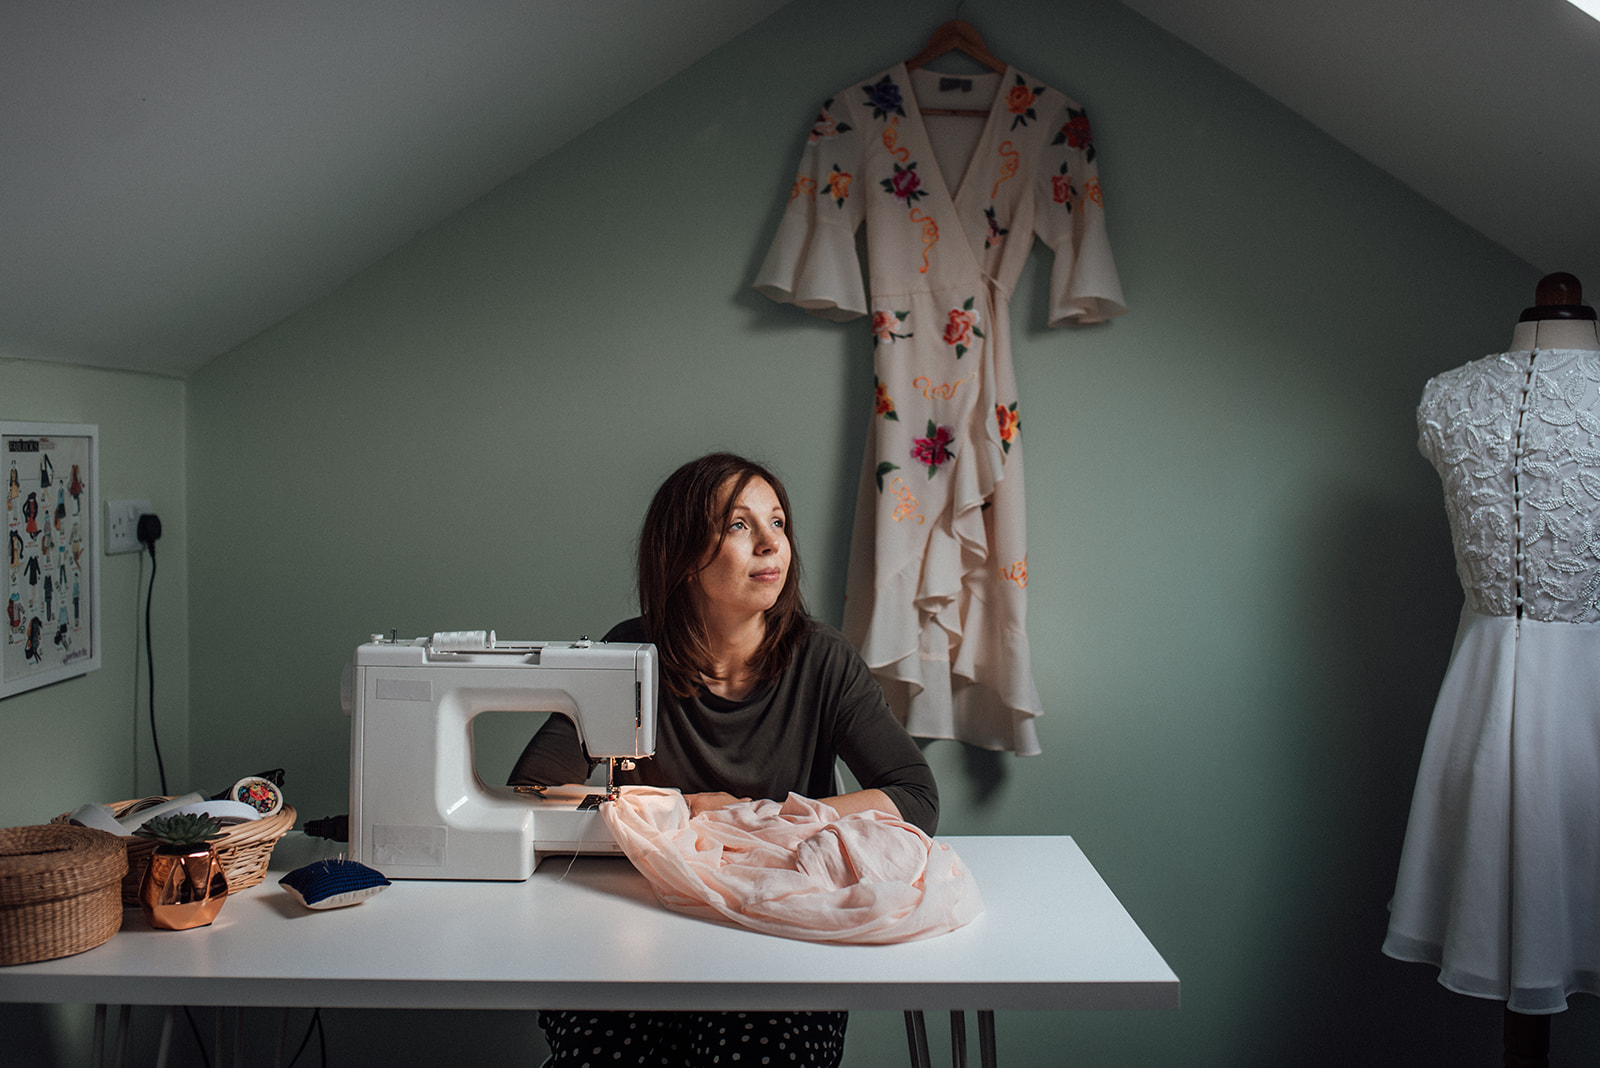 A seamstress in her home studio, making alterations at her sewing machine